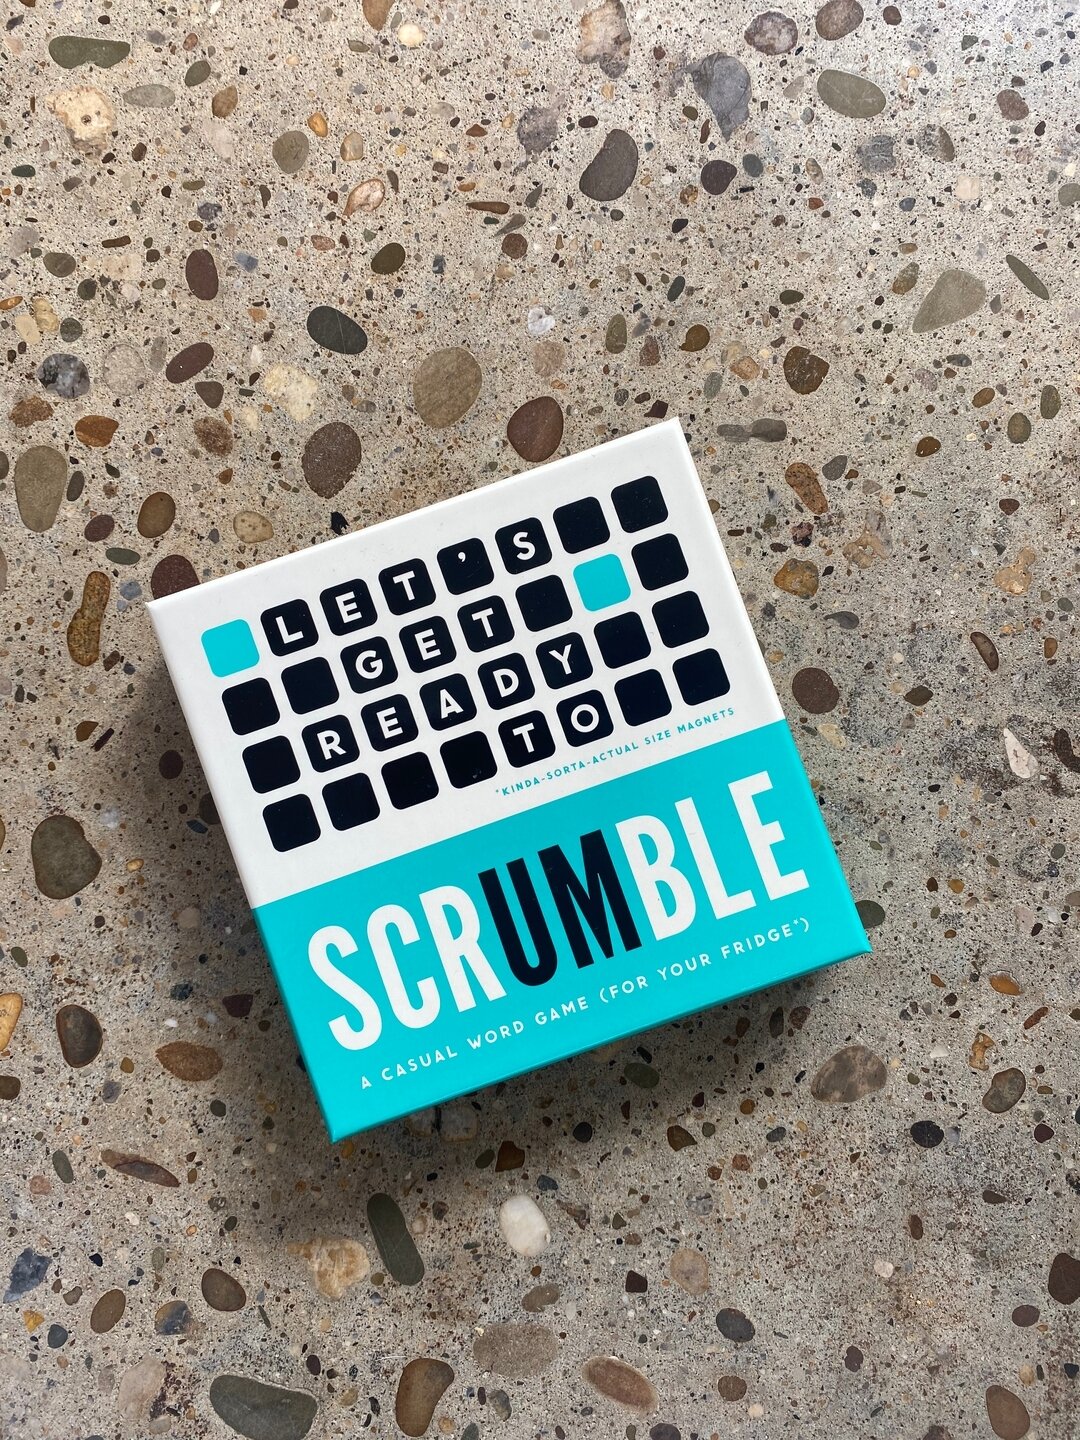 &quot;It's basically just Scrabble&quot; 
-Andrew (Pittsburgh)